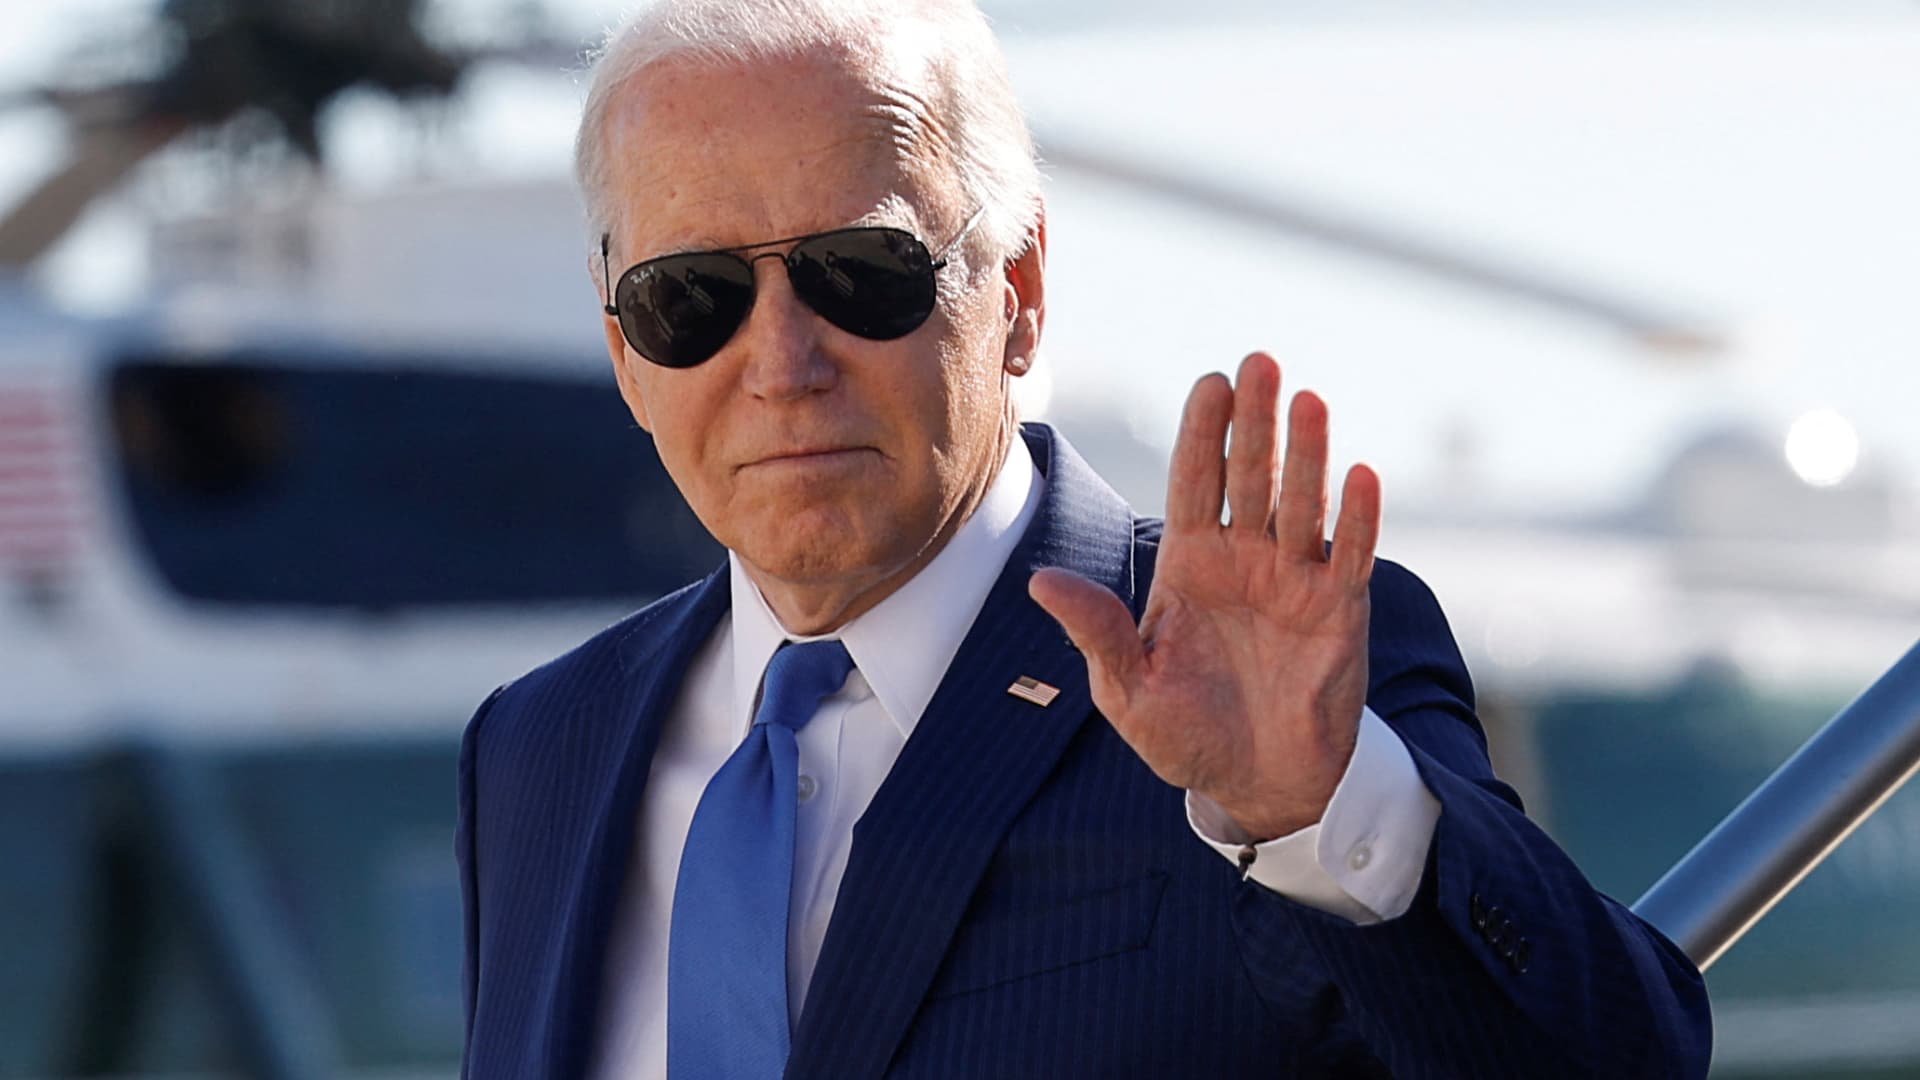 Biden campaign debuts official TikTok account; app is still banned on most government devices